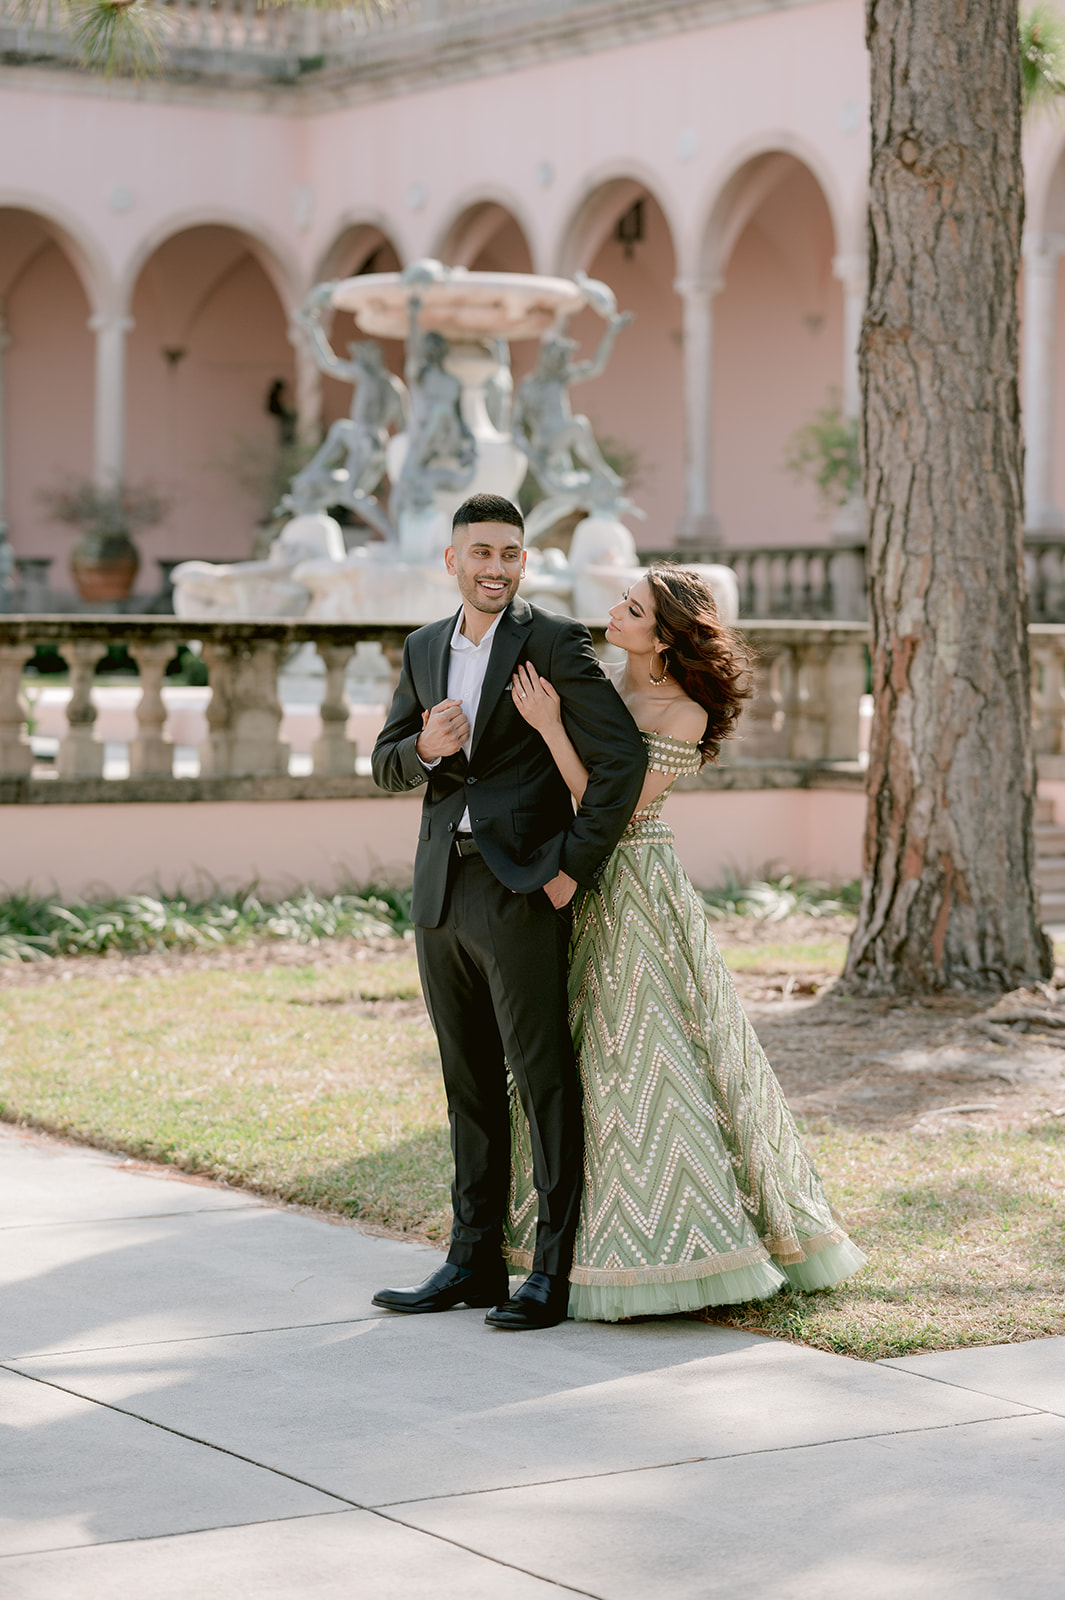 "Ringling Museum engagement shoot with stunning architectural details and Indian attire"
